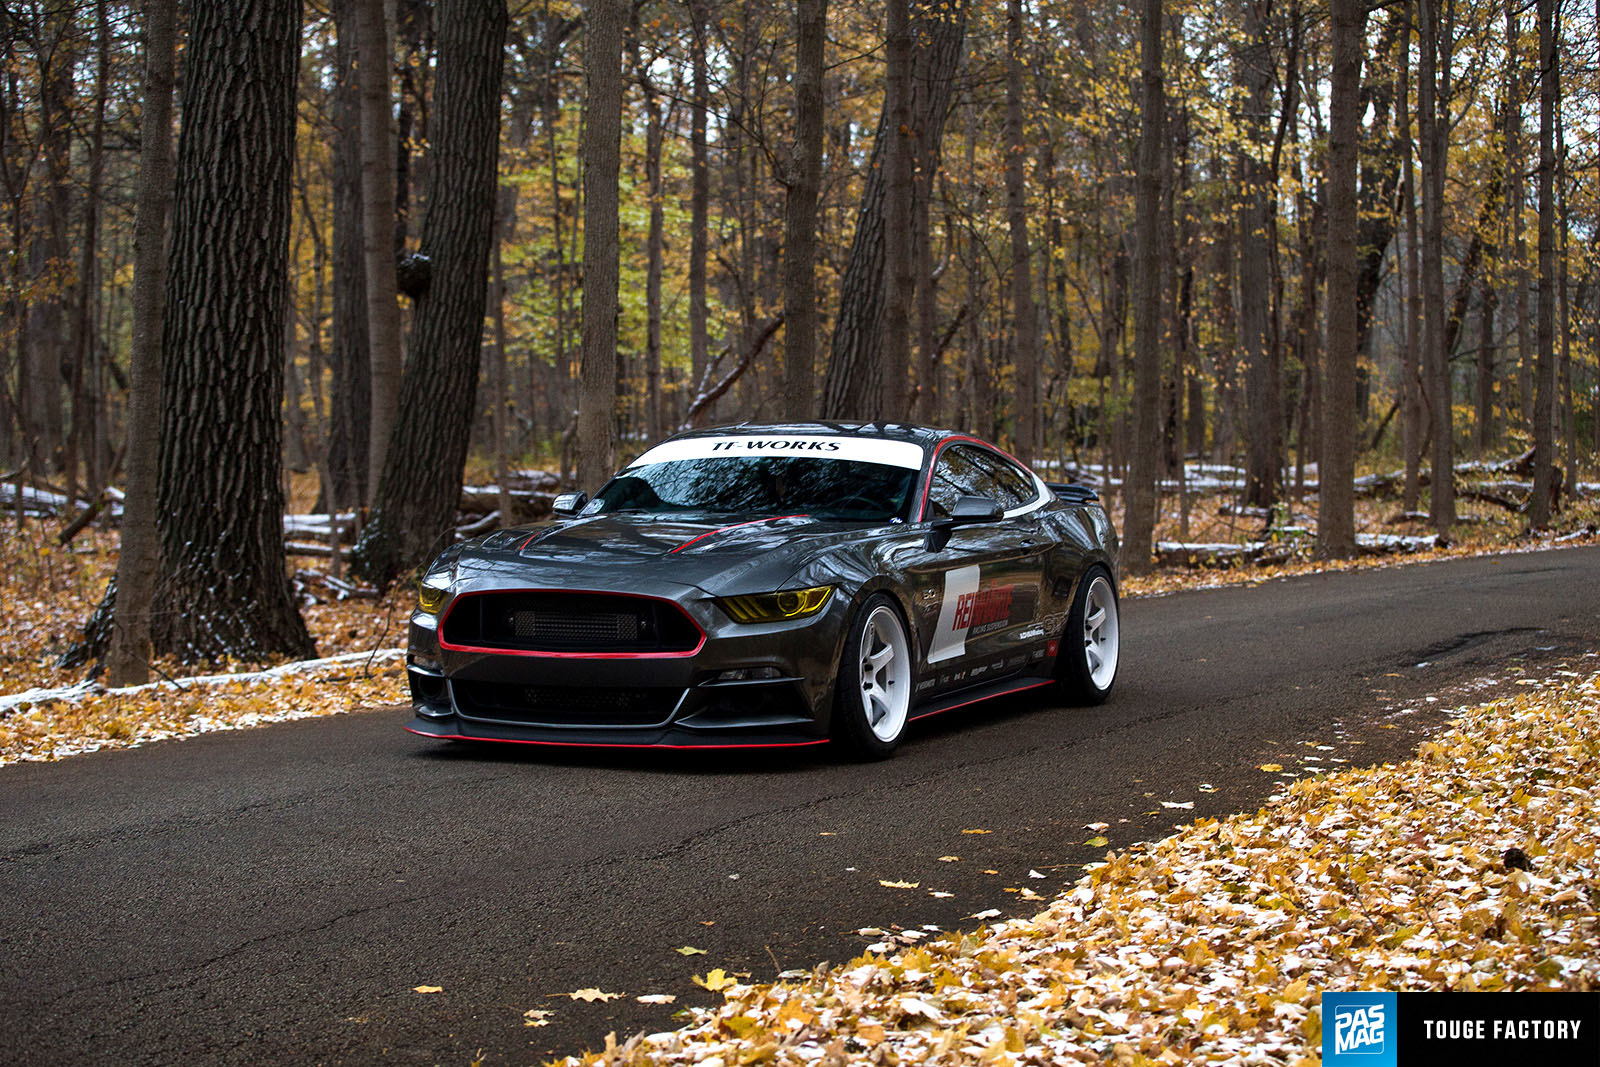 07 Touge Factory 2016 Ford Mustang GT PASMAG